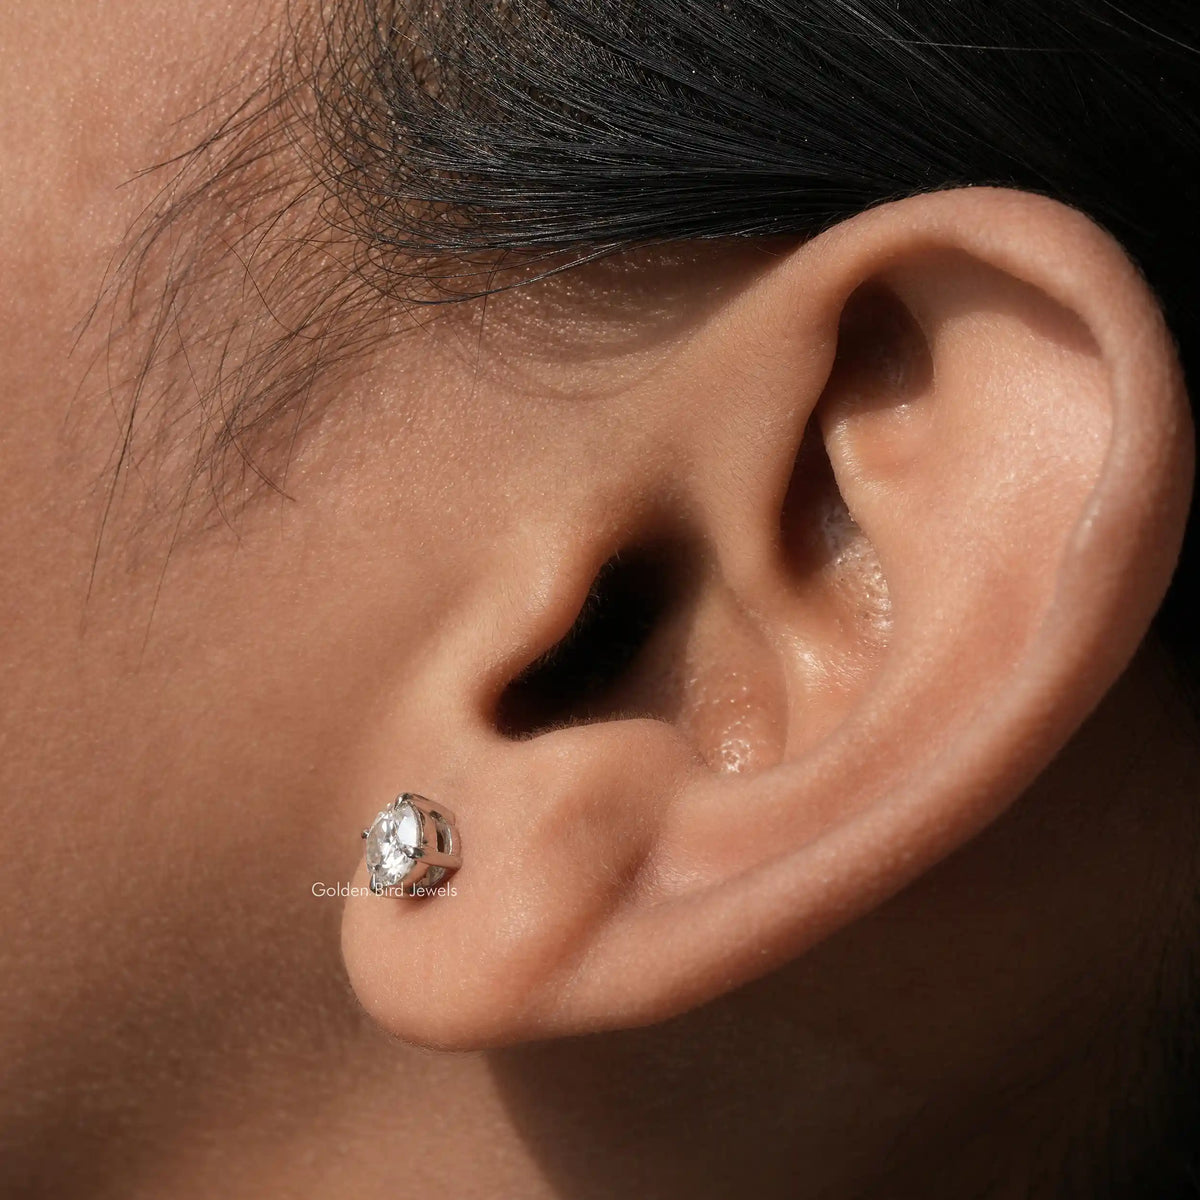 [In ear front view of moissanite round cut earrings made of vvs clarity]-[Golden Bird Jewels]